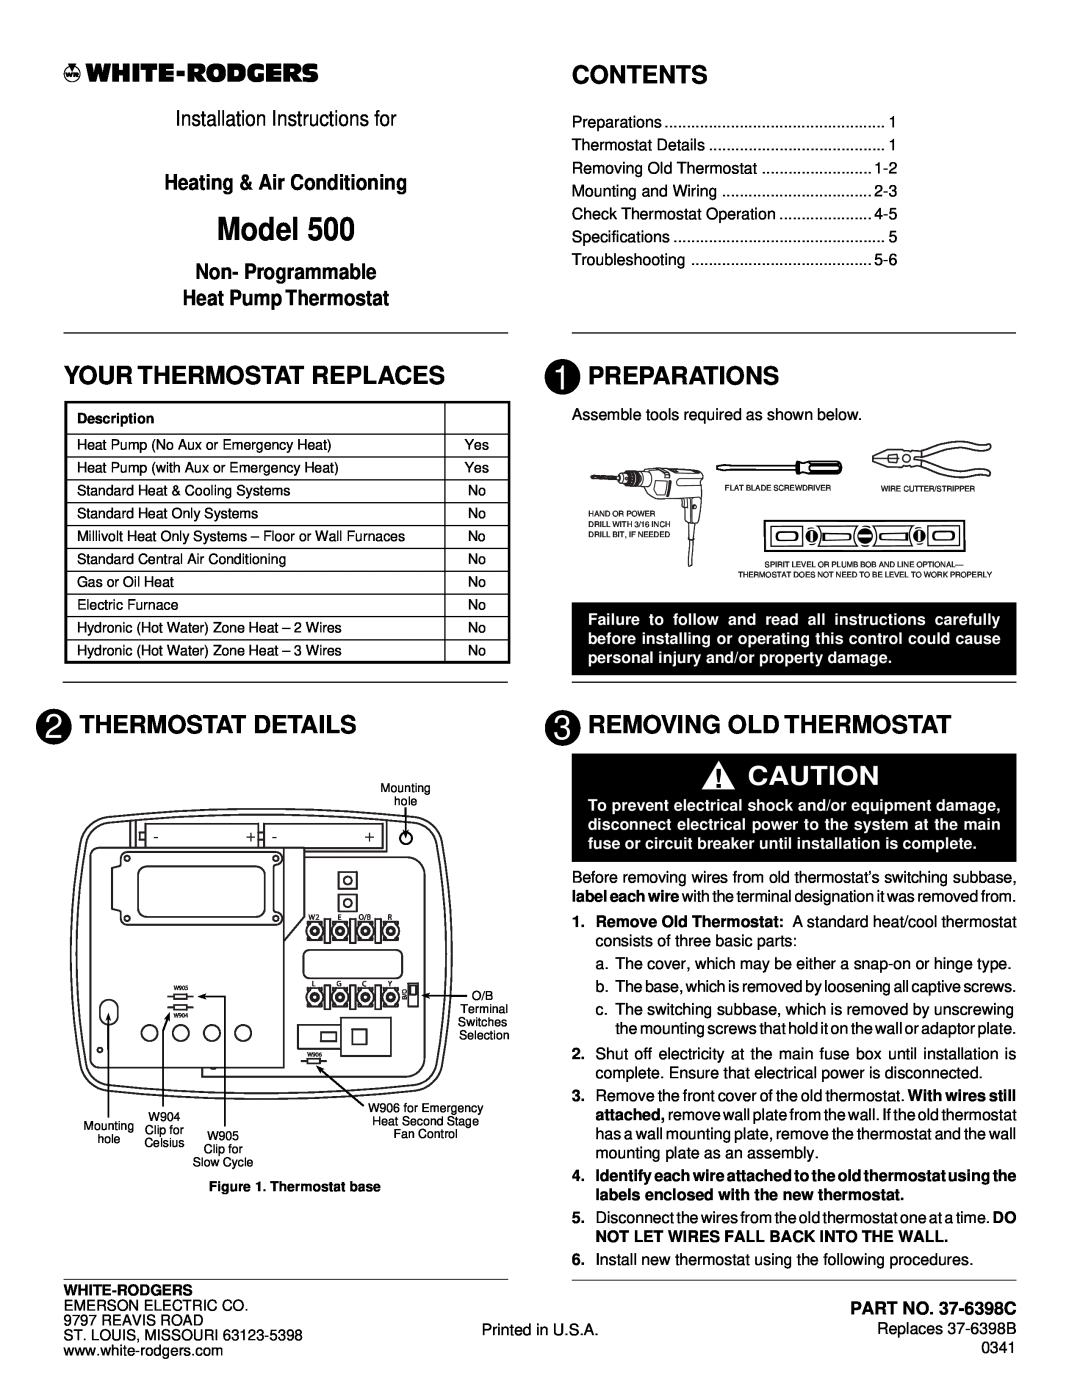 White Rodgers 500 installation instructions Contents, Your Thermostat Replaces, Preparations, Thermostat Details, Model 